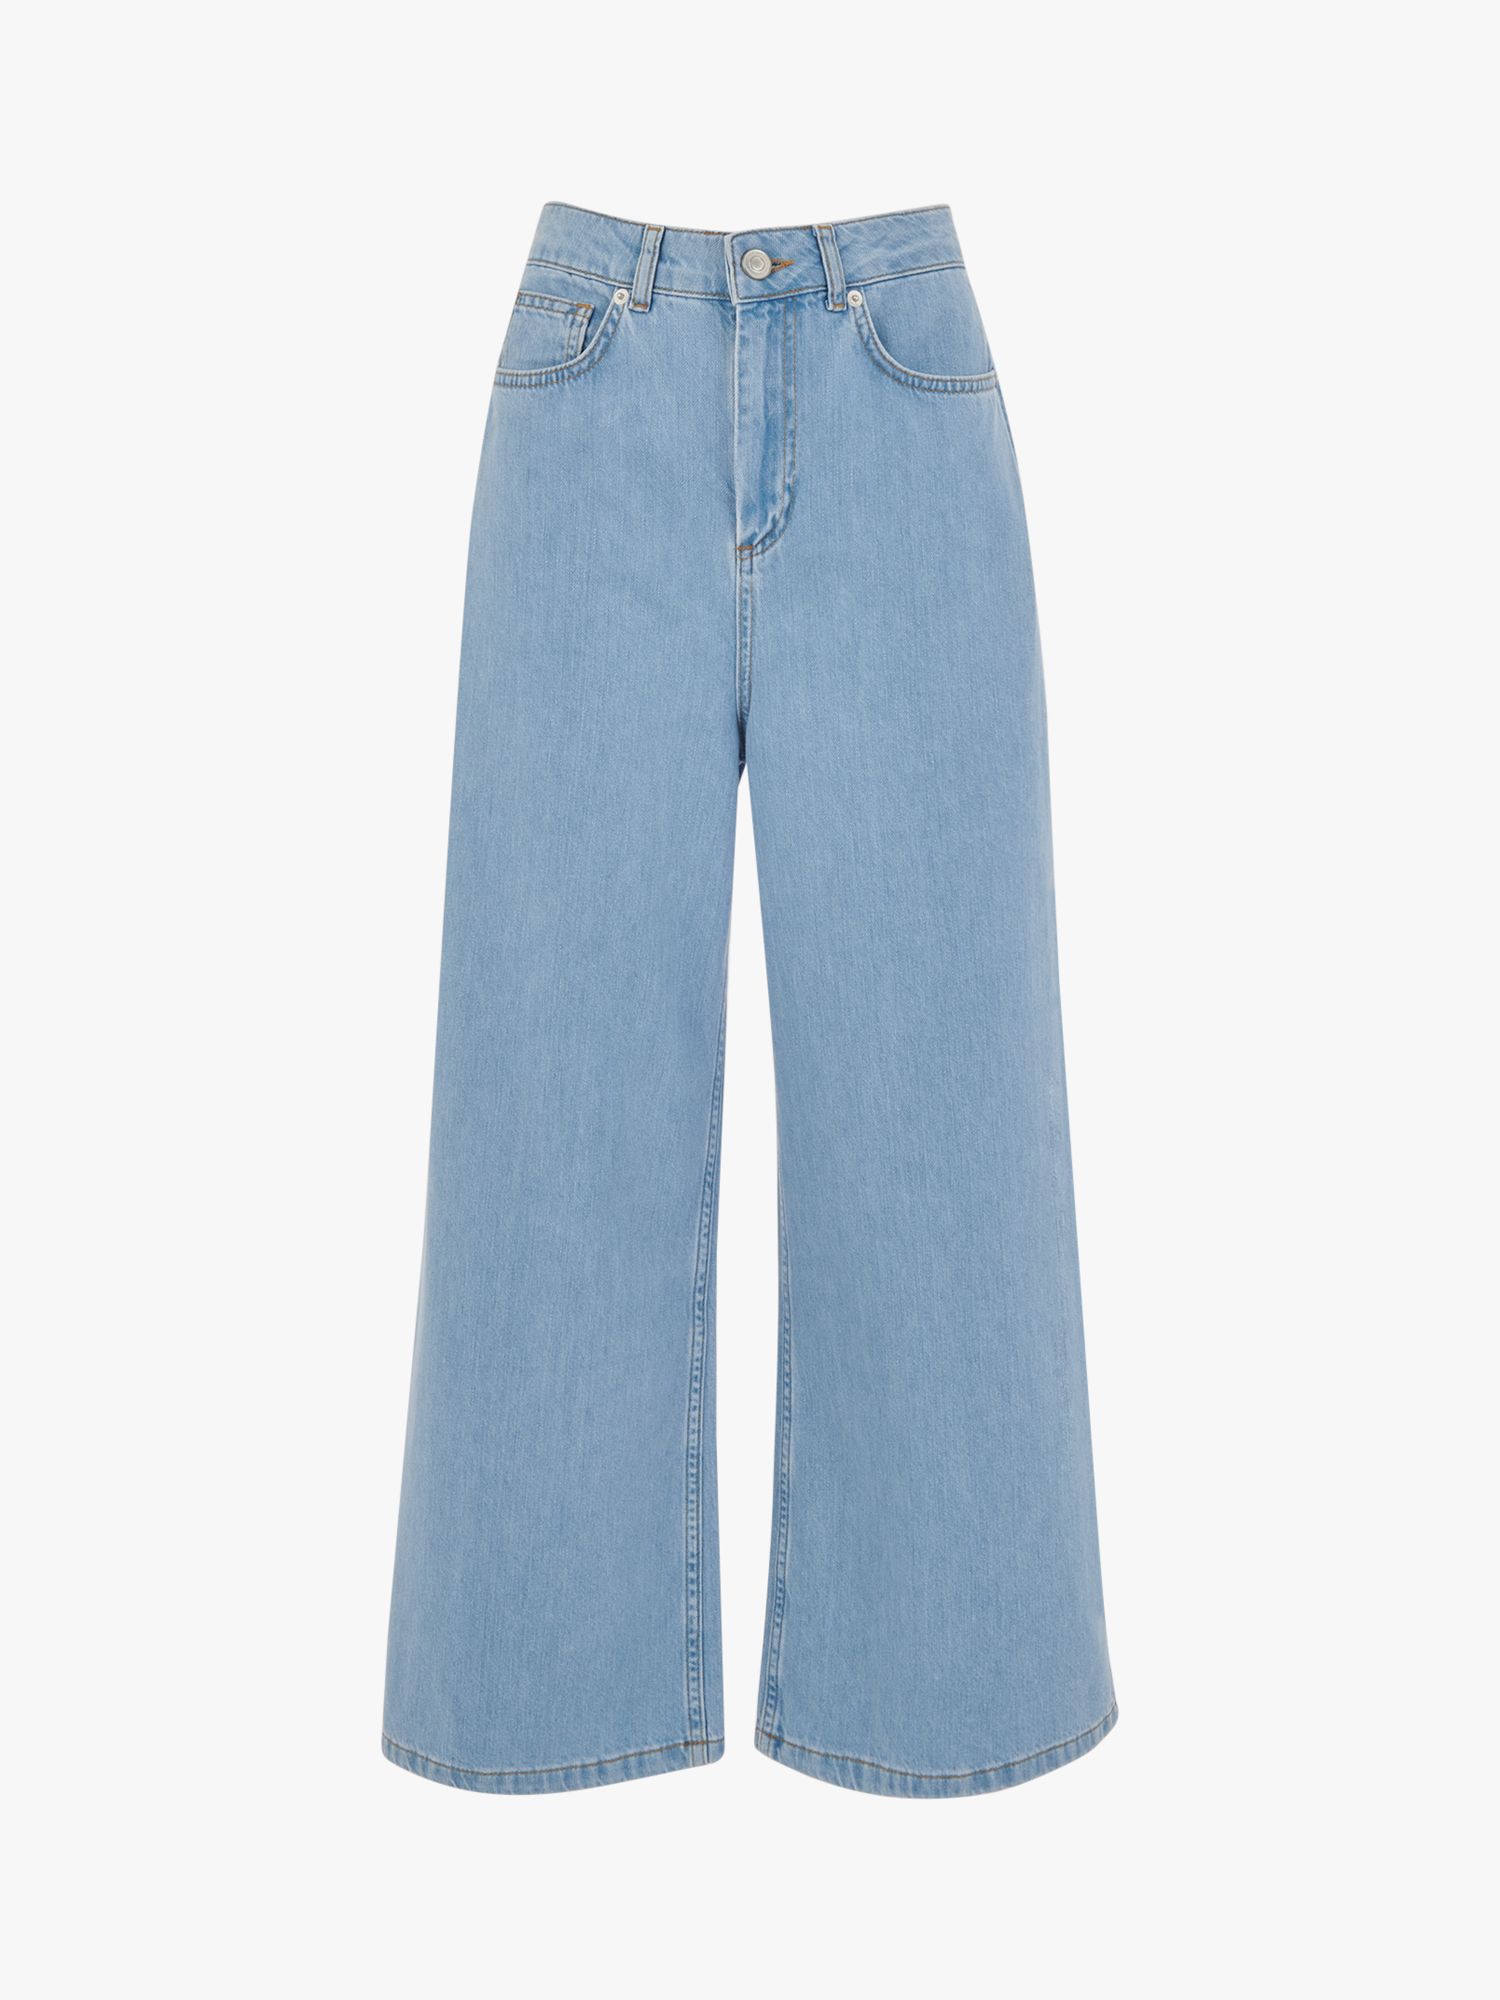 Whistles Wide Leg Cropped Jeans, Light Blue, 26